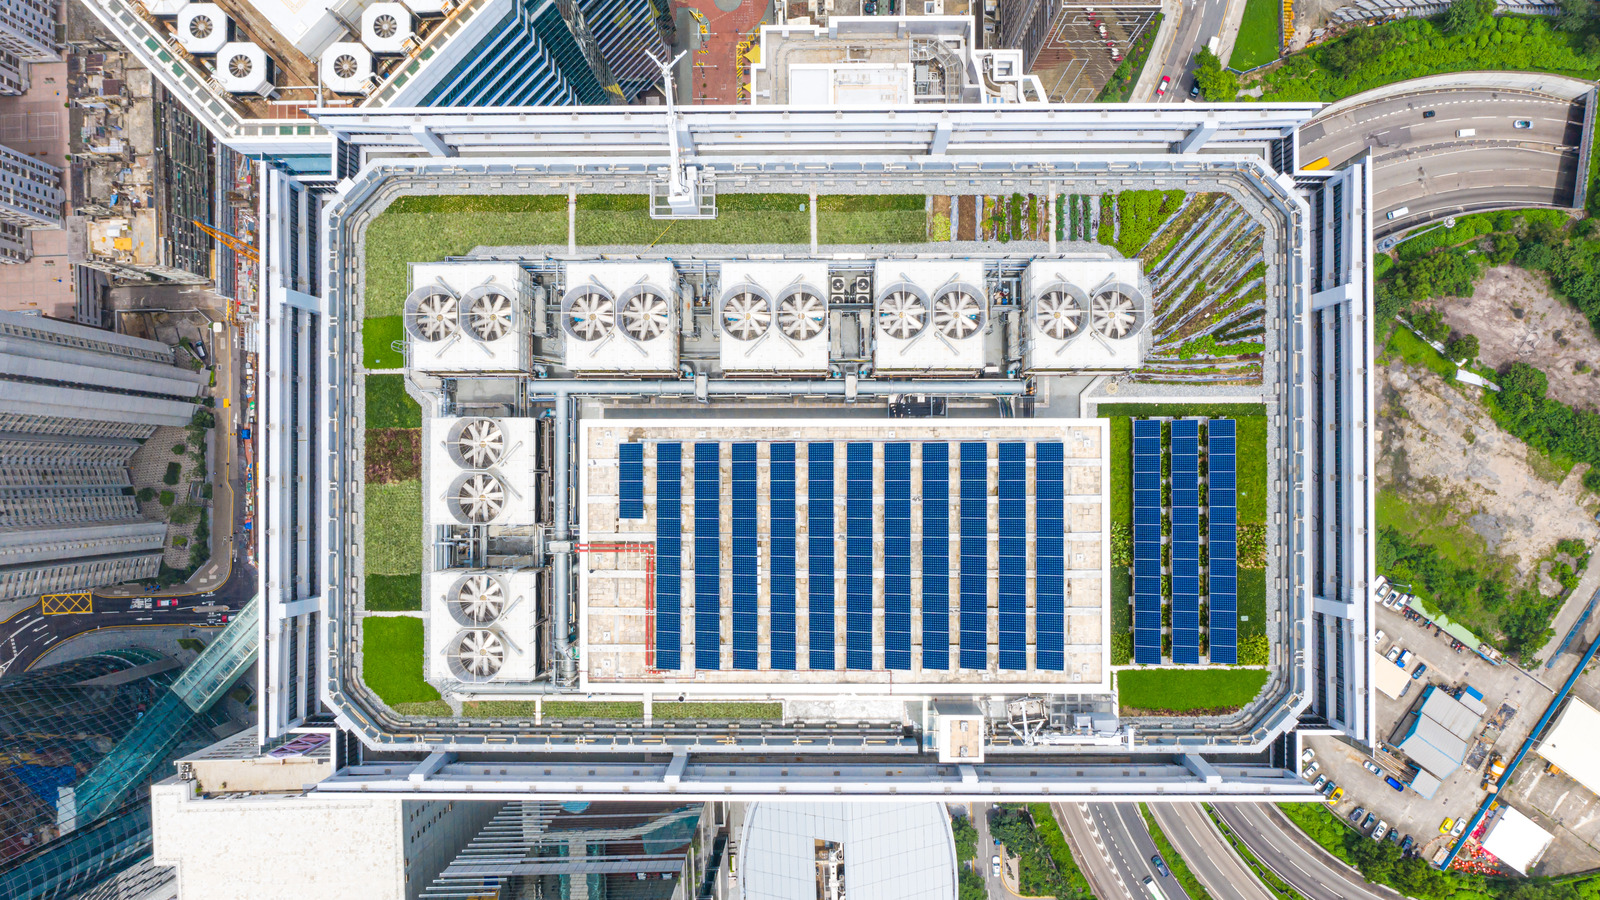 What Makes Commercial Solar Panels Different, And Can You Use Them On Your Home?